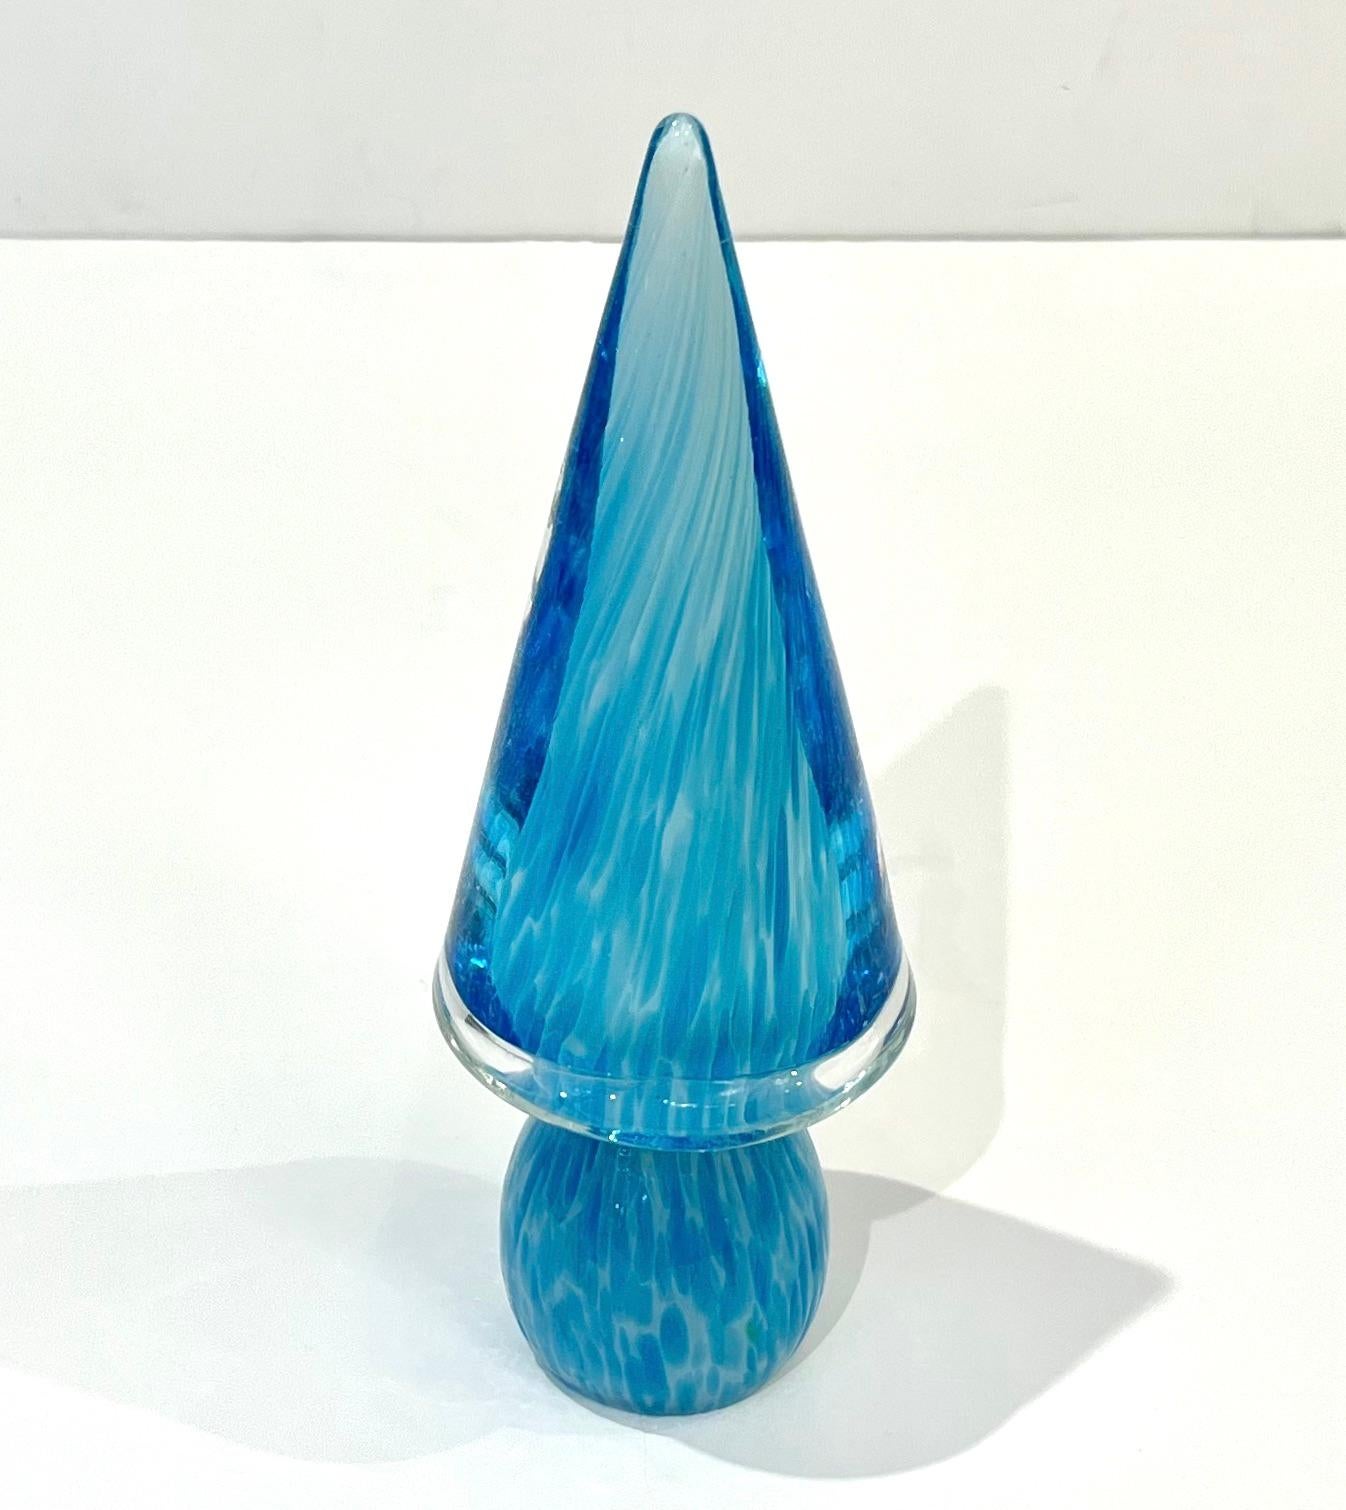 Organic Modern Formia 1980s Italian Vintage Turquoise Blue & White Murano Glass Tree Sculpture For Sale